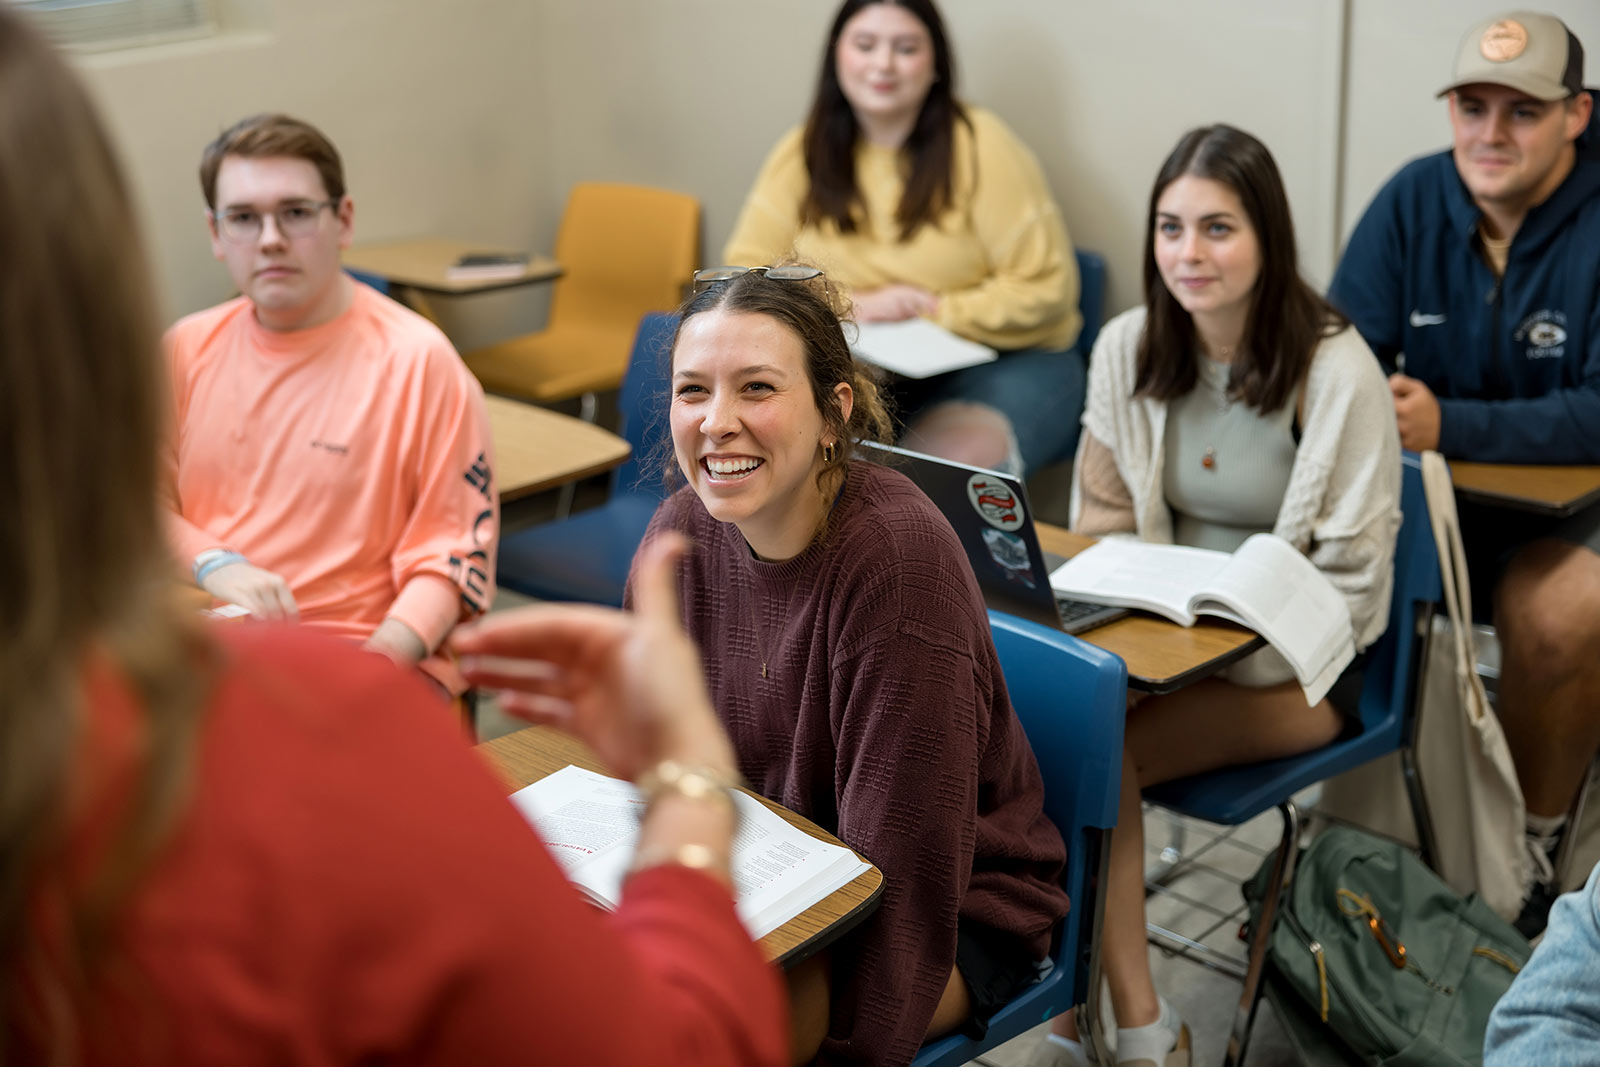 English Major Students in Class at Mississippi College